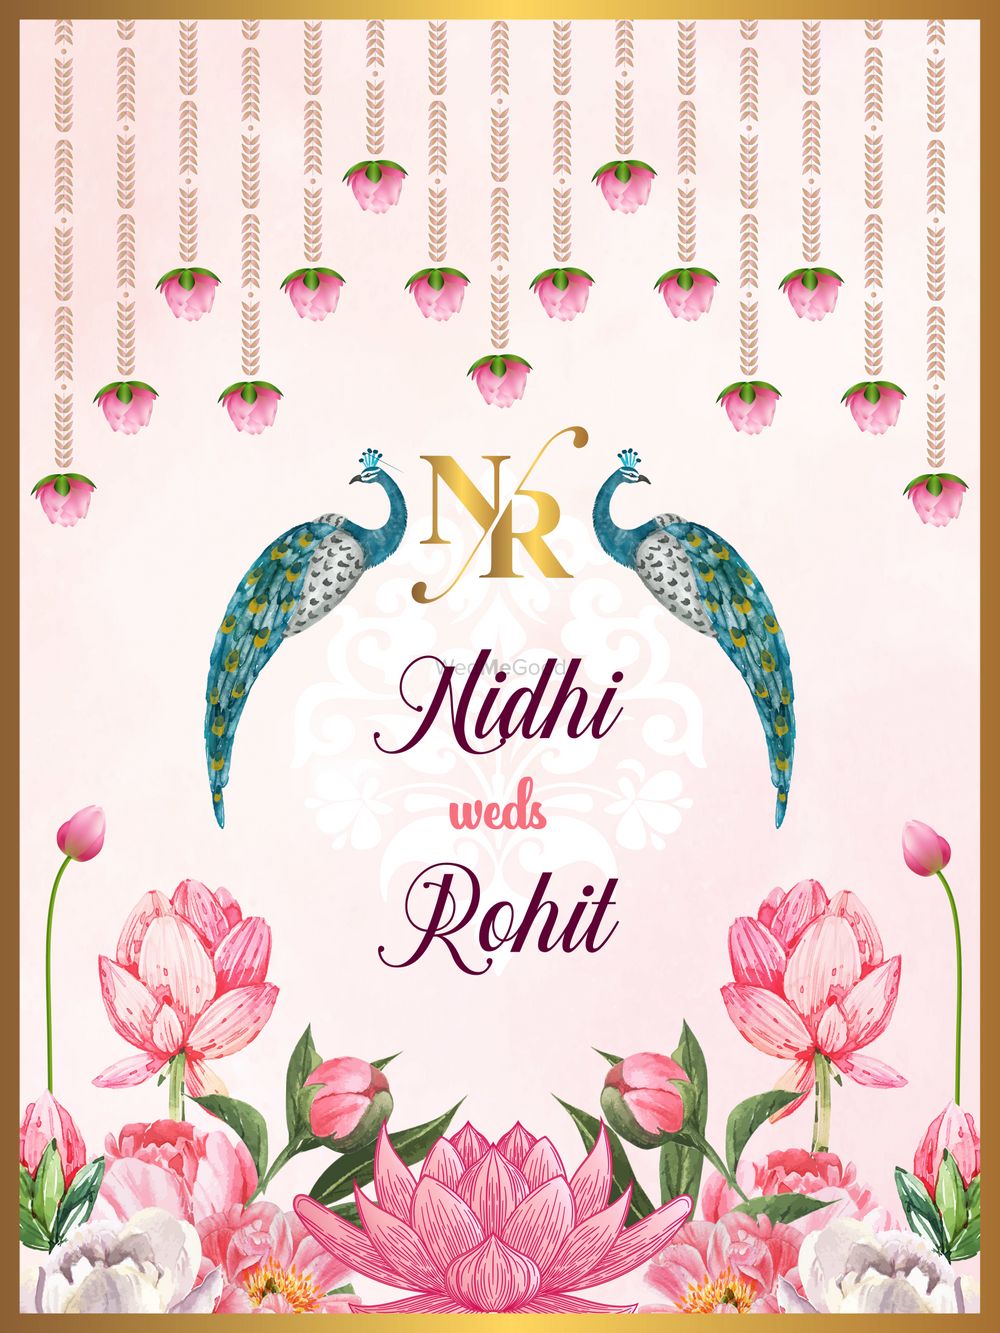 Photo From Nidhi + Rohit - By Designs by Gulmohar Inc.